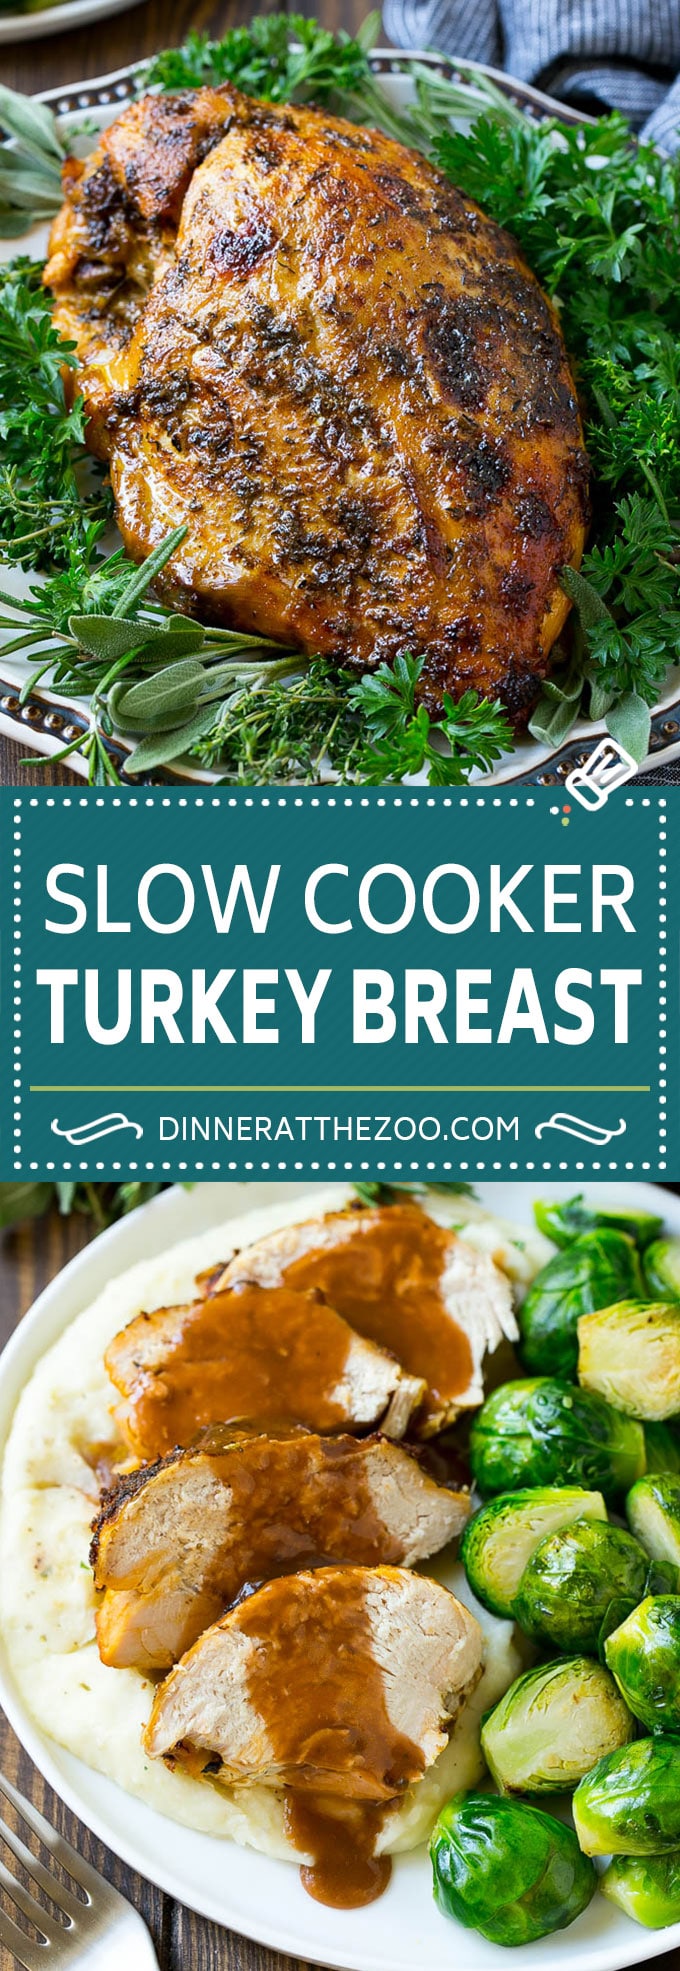 This slow cooker turkey breast is coated in a seasoned herb butter, then placed in the crock pot to cook to tender perfection. It's the perfect way to free up oven space for your big holiday meal.